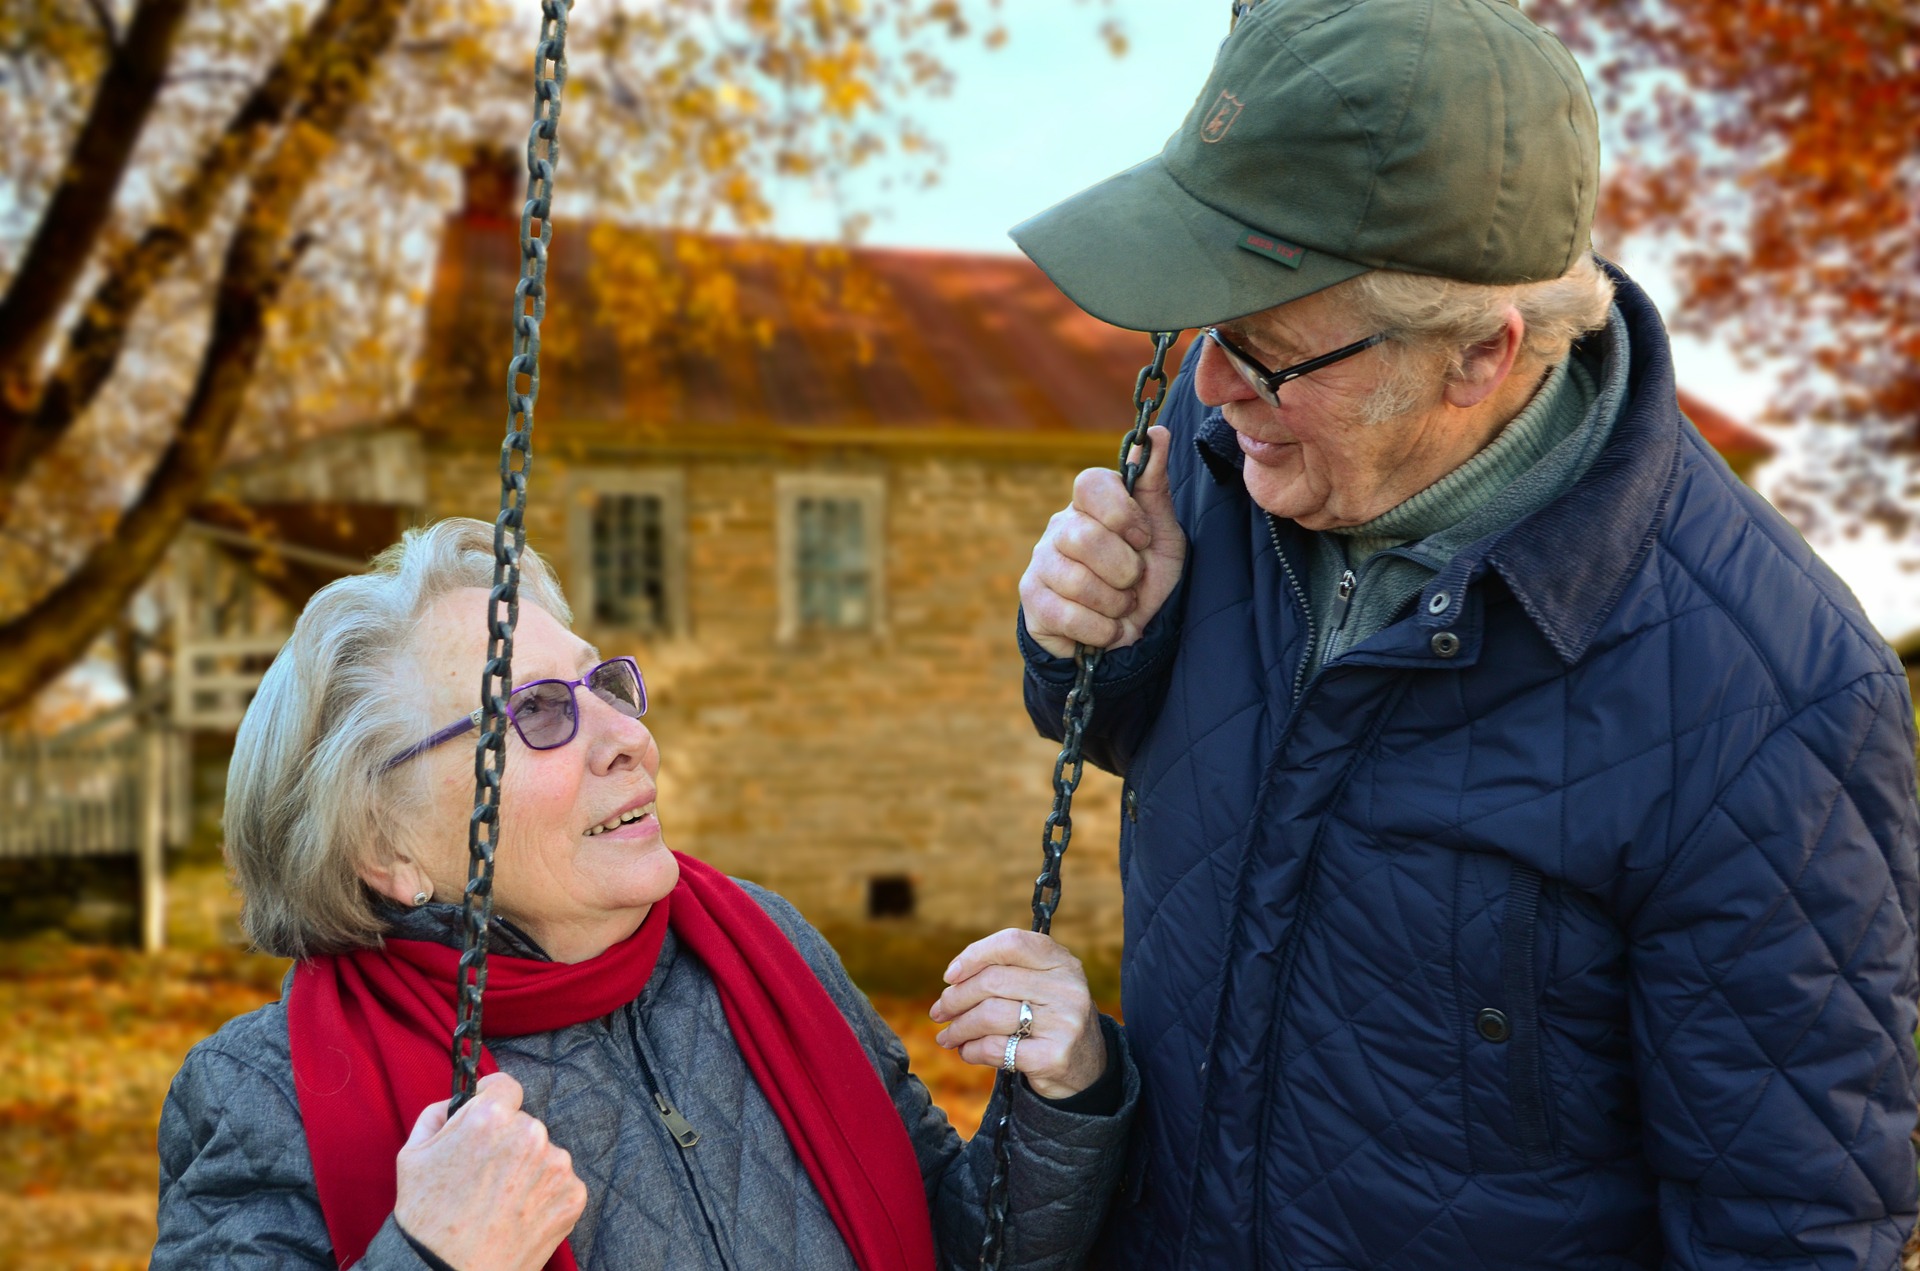 Tips on Making Your Home Safe and Comfortable for Your Aging Parents